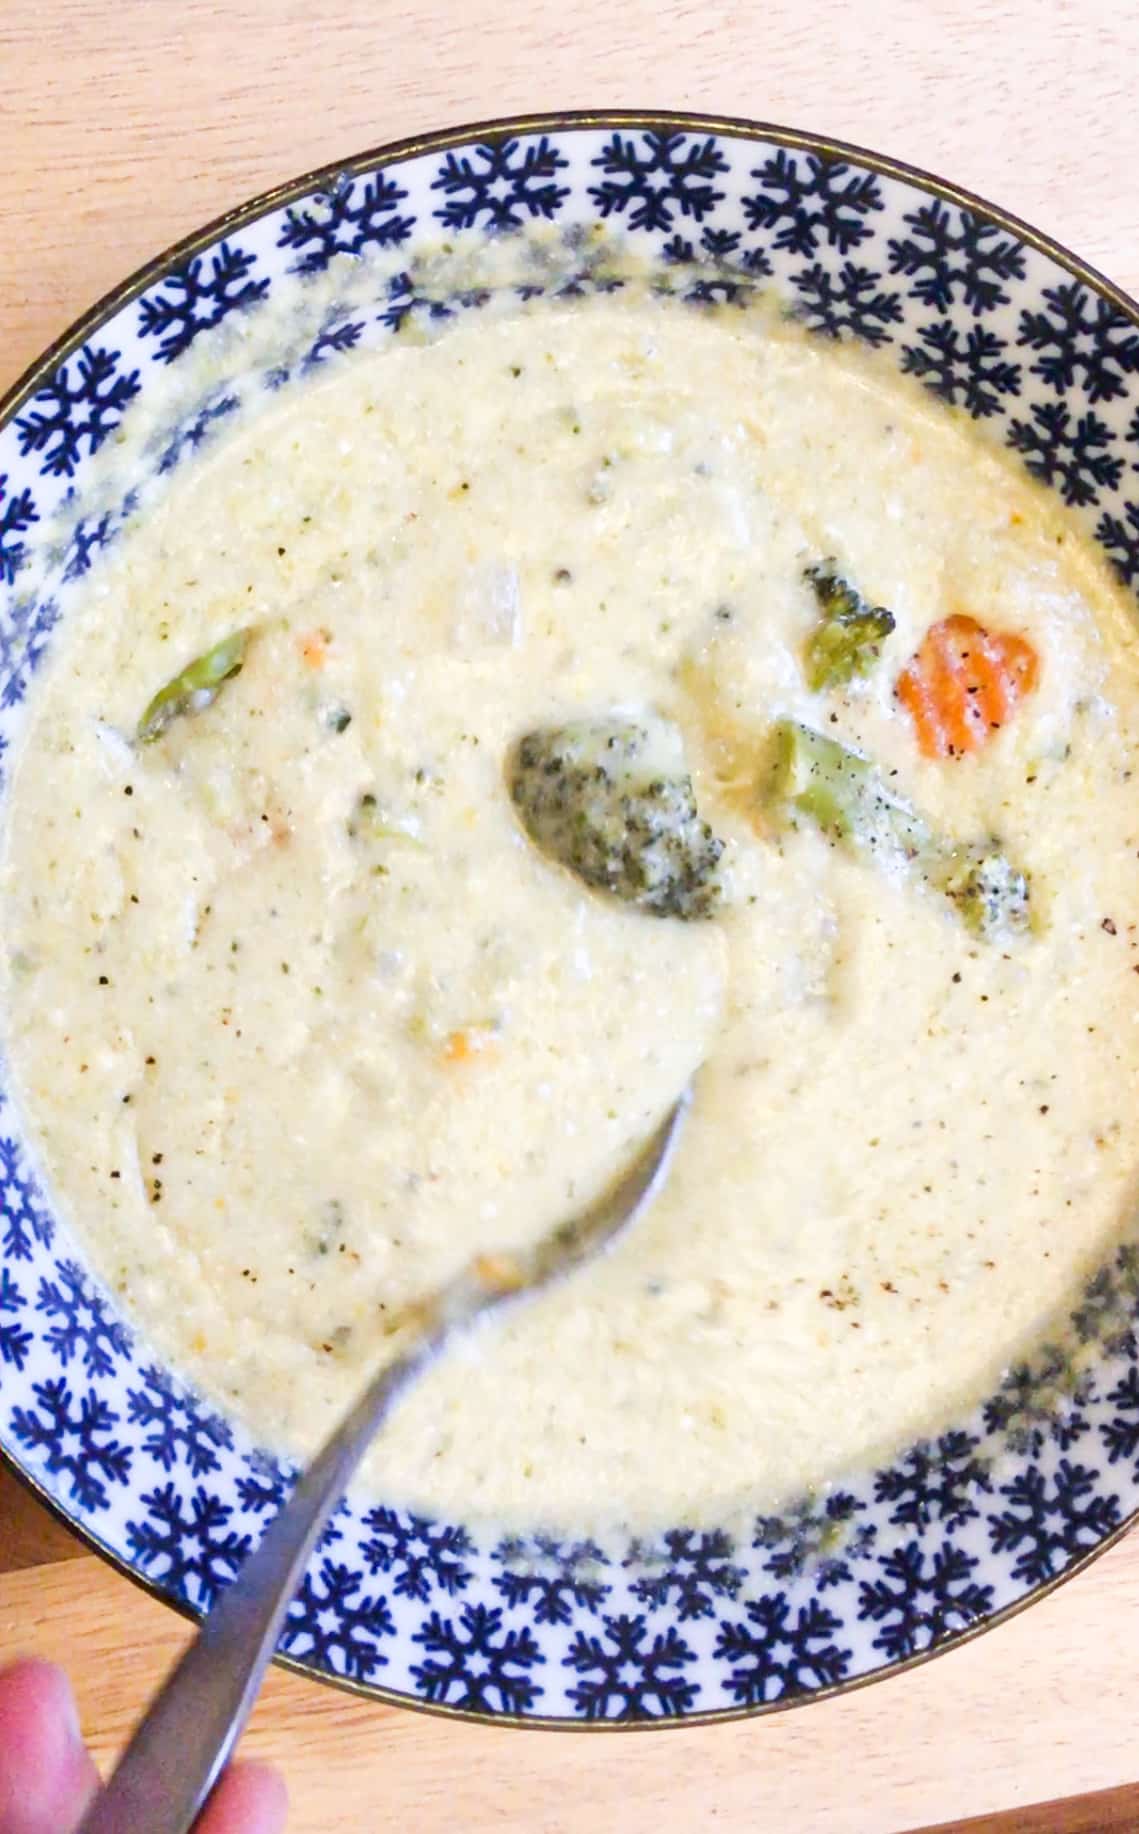 vegetarian broccoli cheddar soup  is served and being eaten.